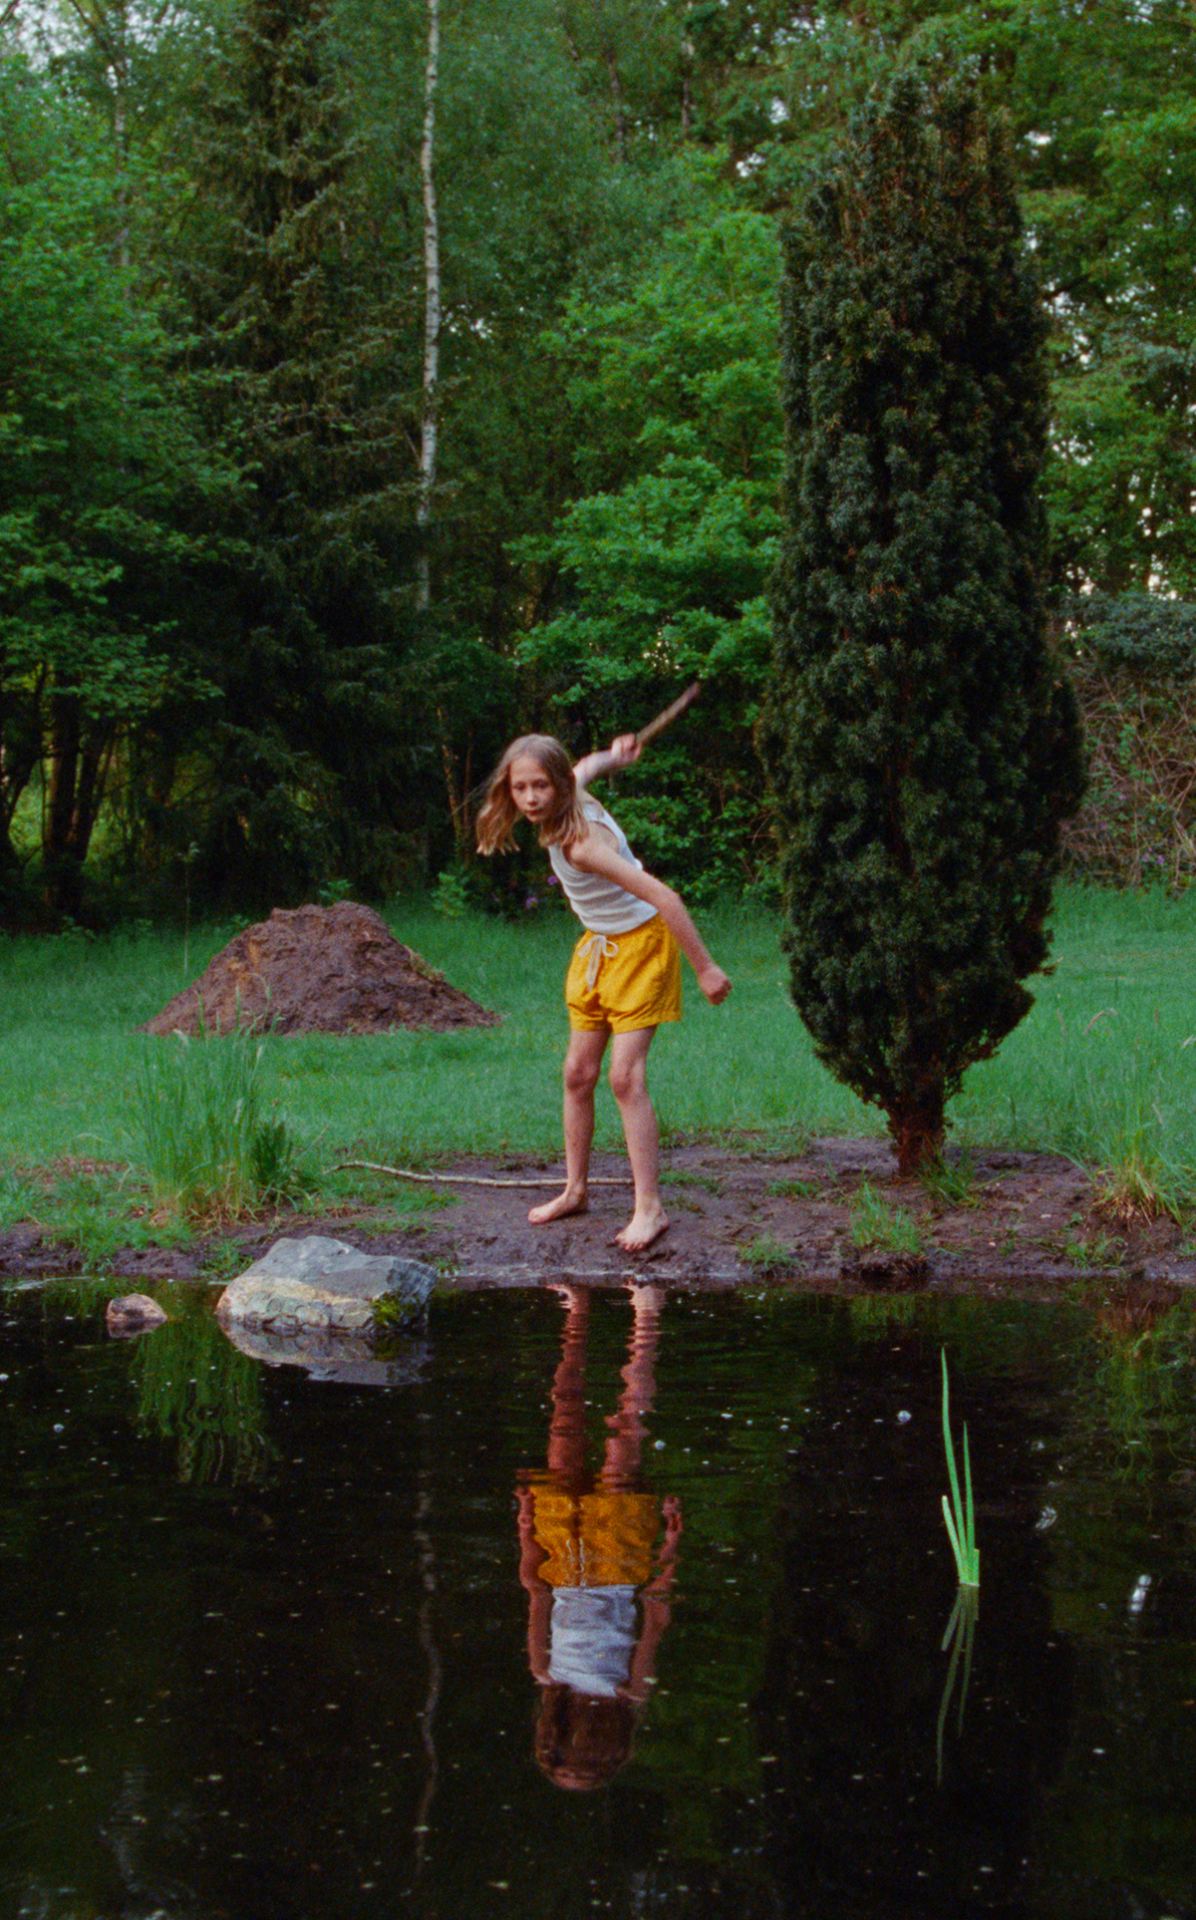 An image of a girl throwing a stick into a lake. Her reflection is in a still, standing pose.